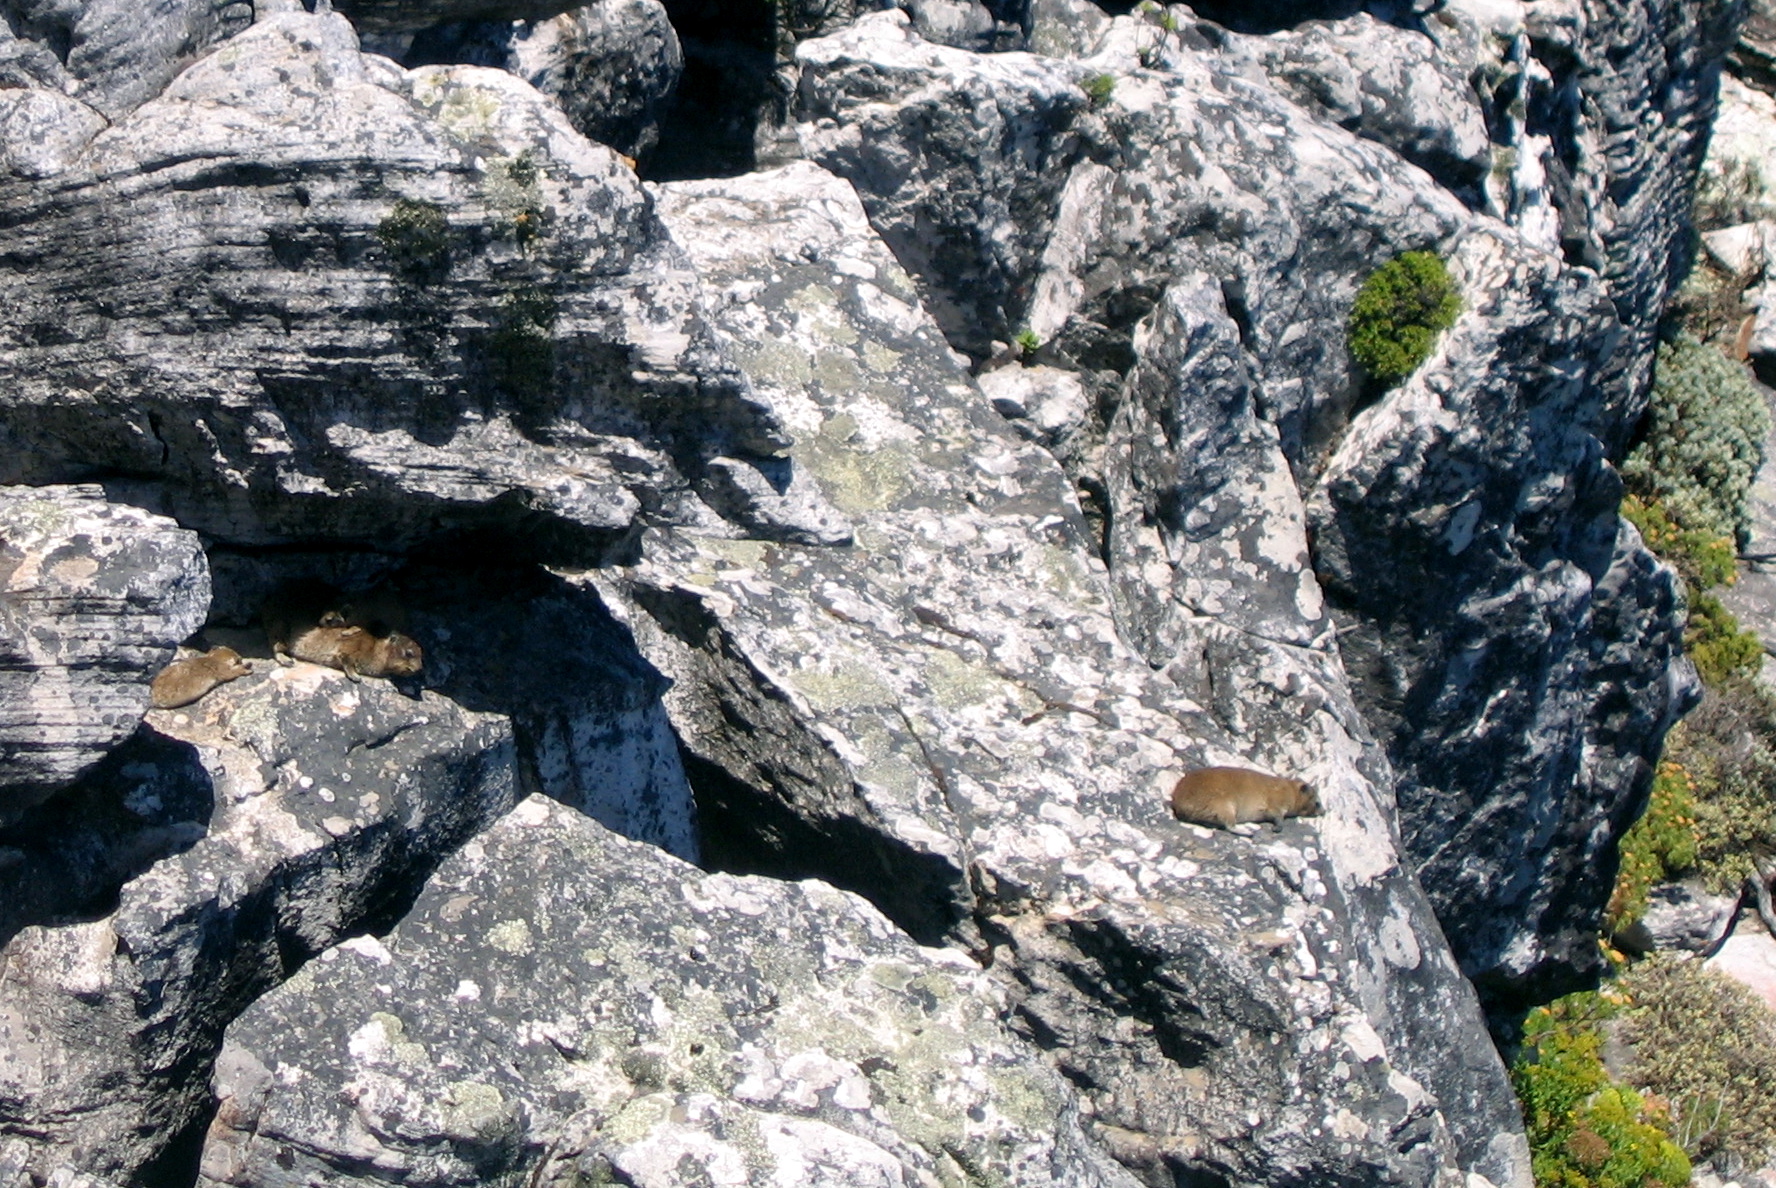 a group of animals laying in a pile of rocks